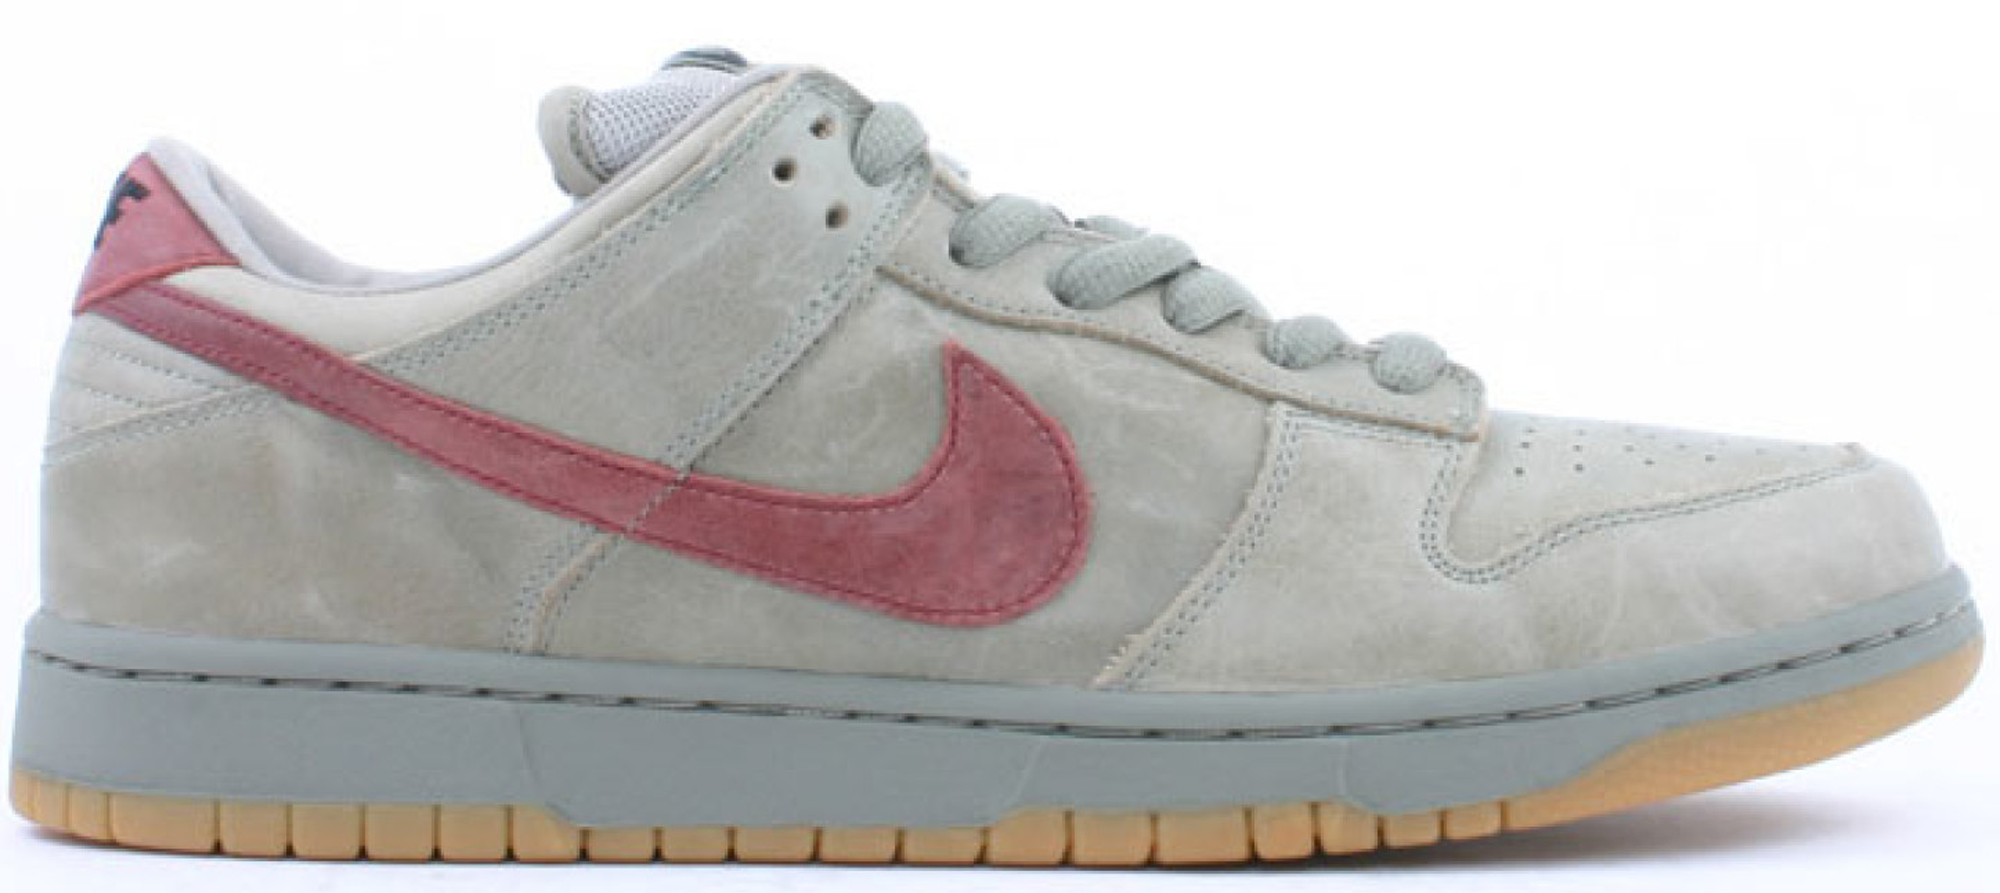 Nike SB Dunk Low Grit Team Red - 304292 